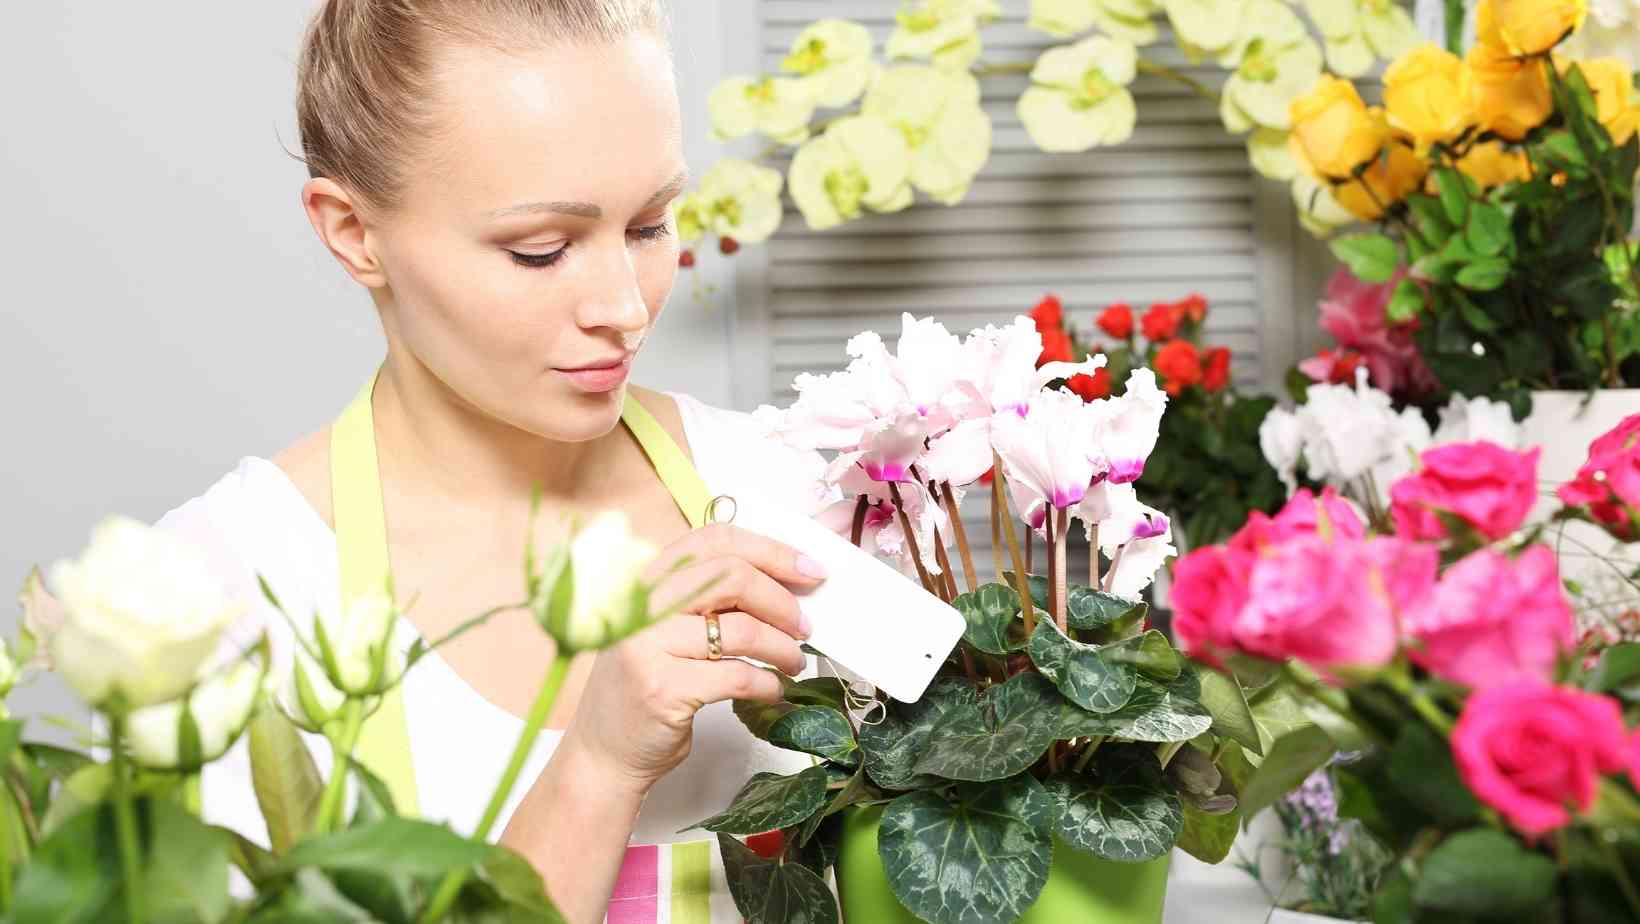 Transform Your Home Using Flowers